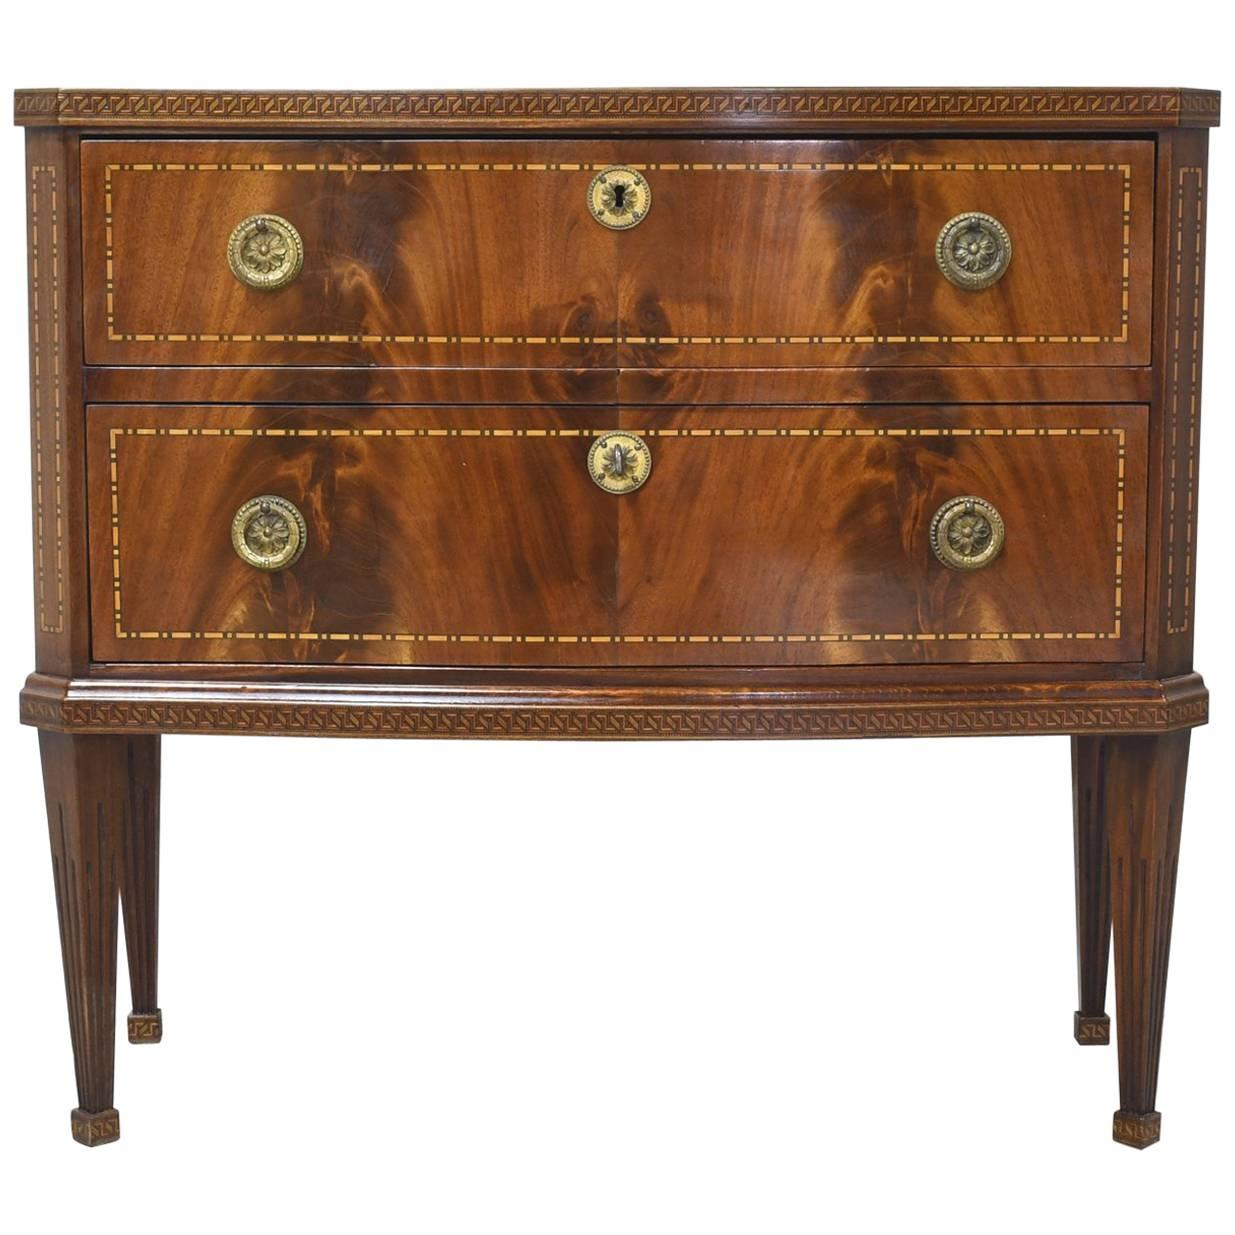 Chest with two drawers on four square tapering legs with book-matched crotch mahogany front with marquetry inlays of Greek key along top and bottom edge and decorative inlaid bandings delineating drawer fronts, chamfered corners and sides. Denmark,